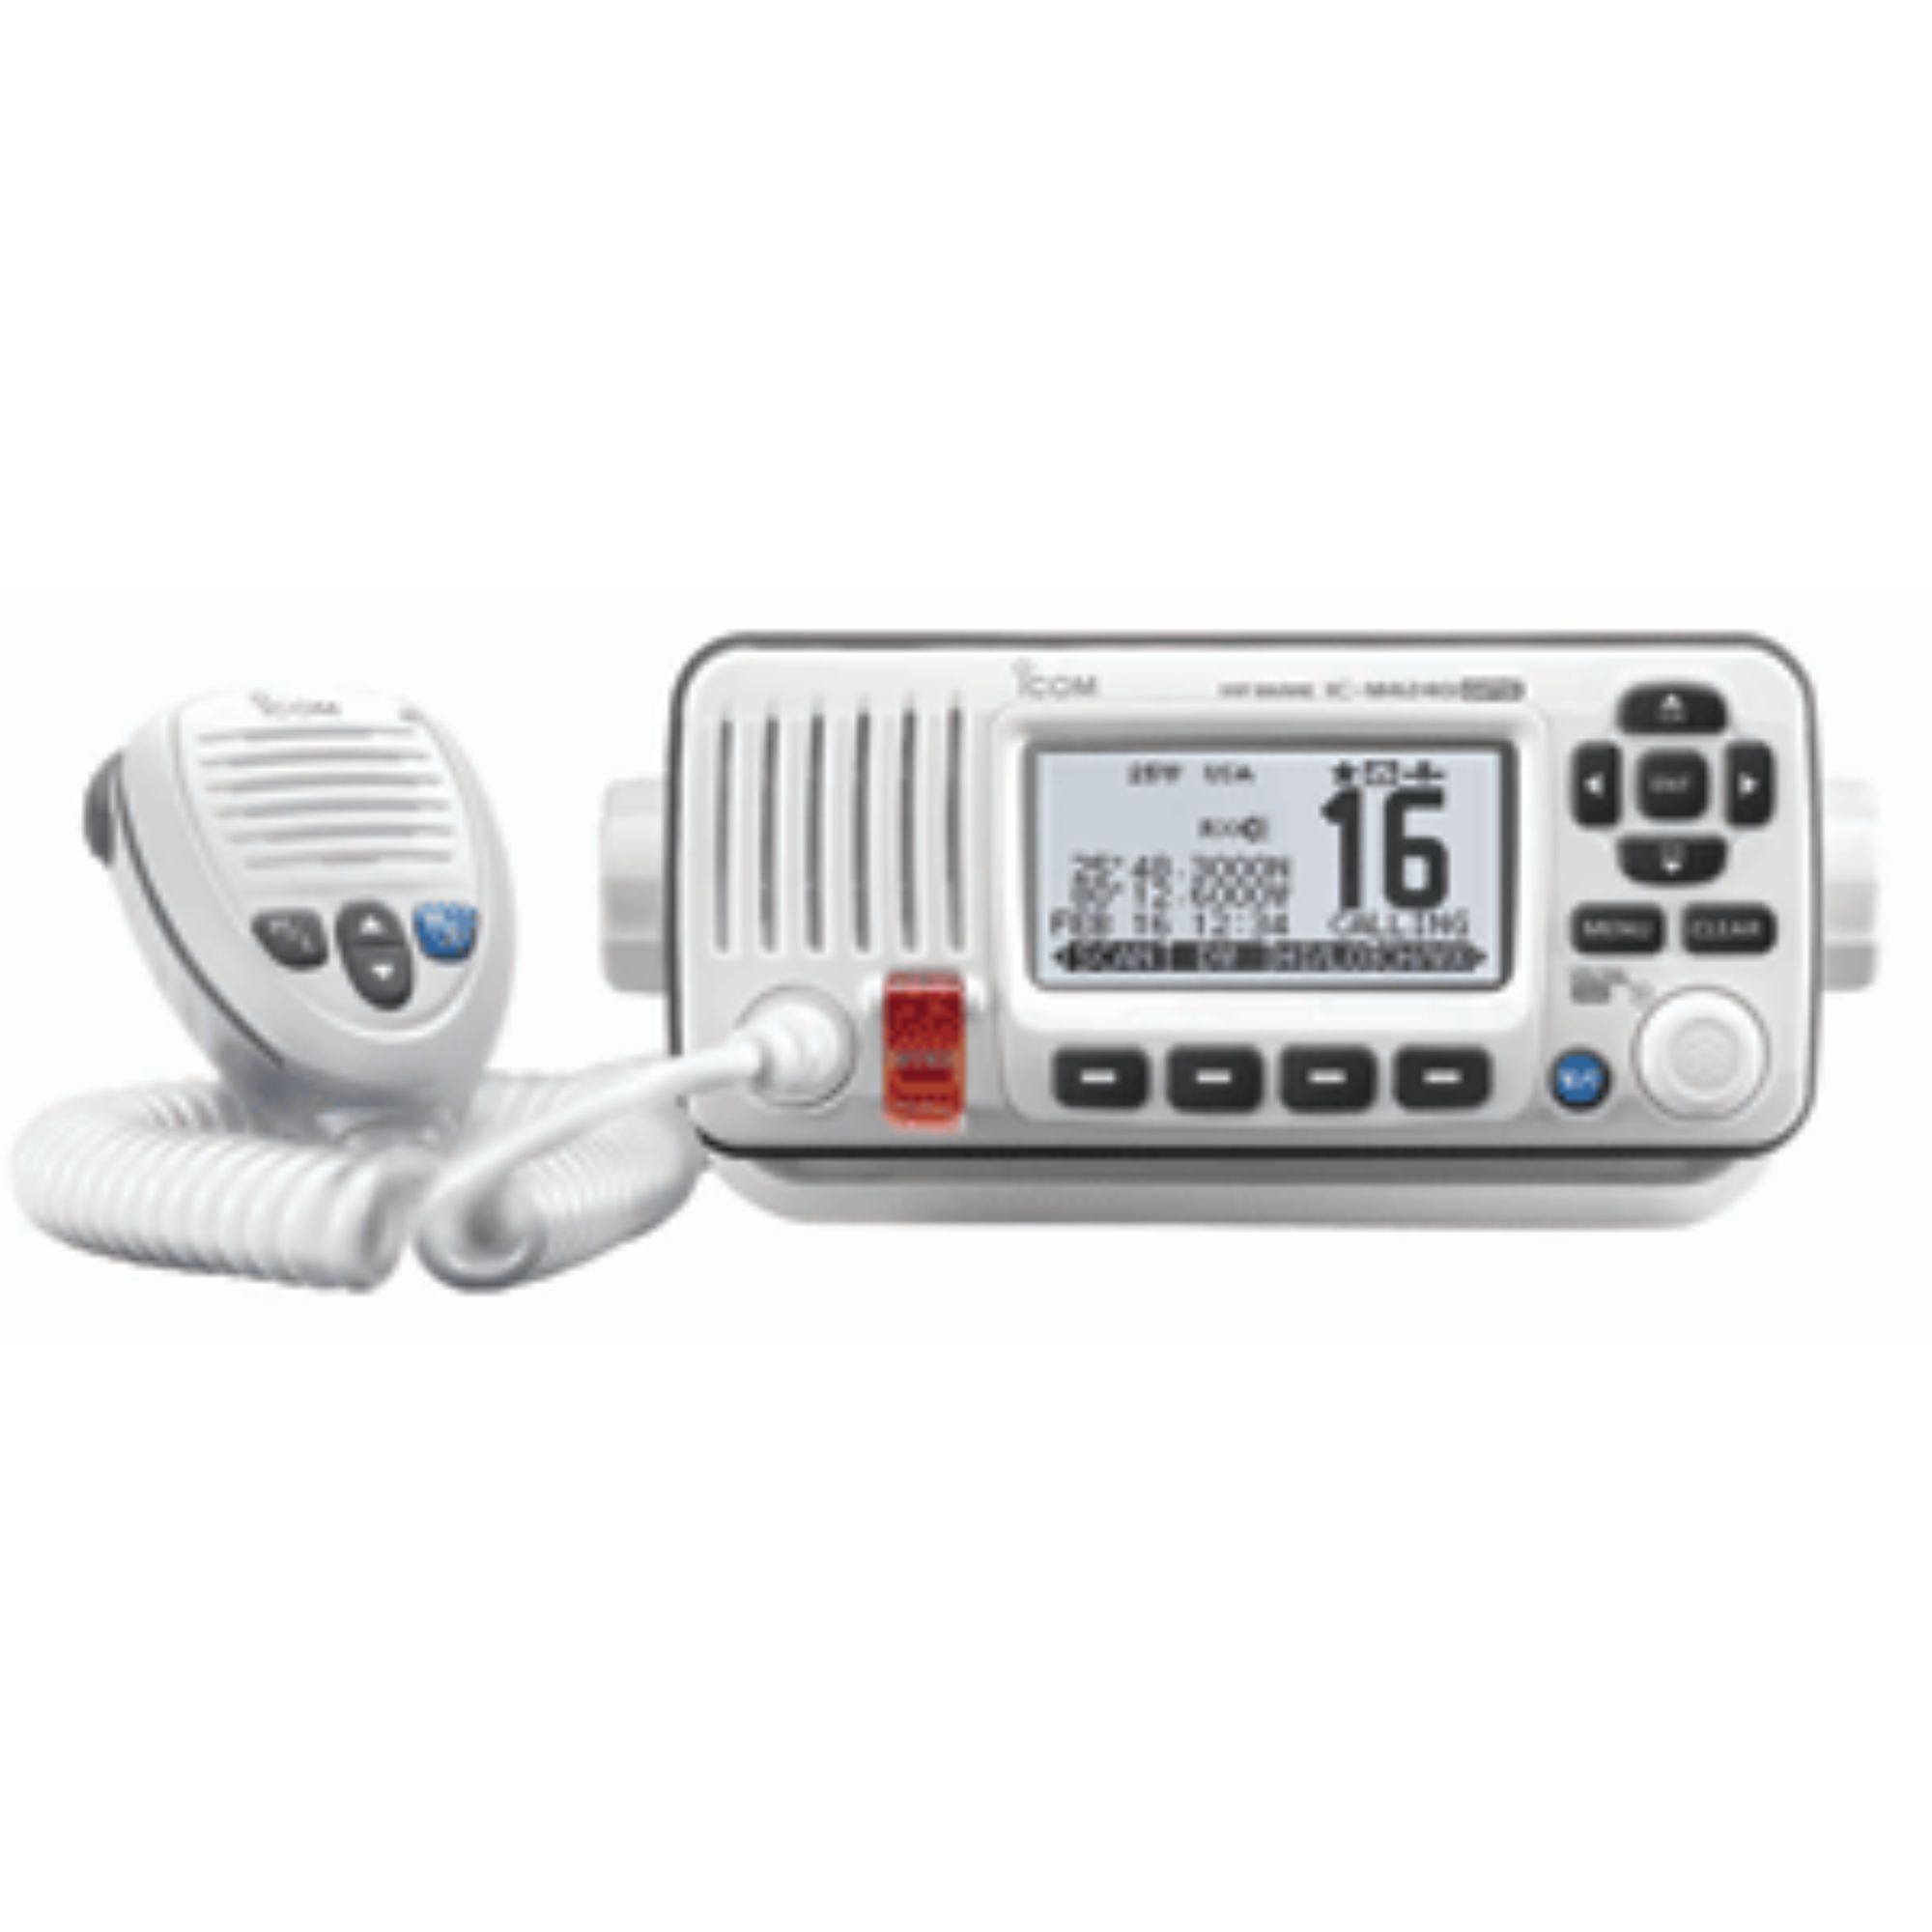 Icom M424g Fixed Mount Vhf Marine Transceiver W/built-in Gps - Super White - image 1 of 3